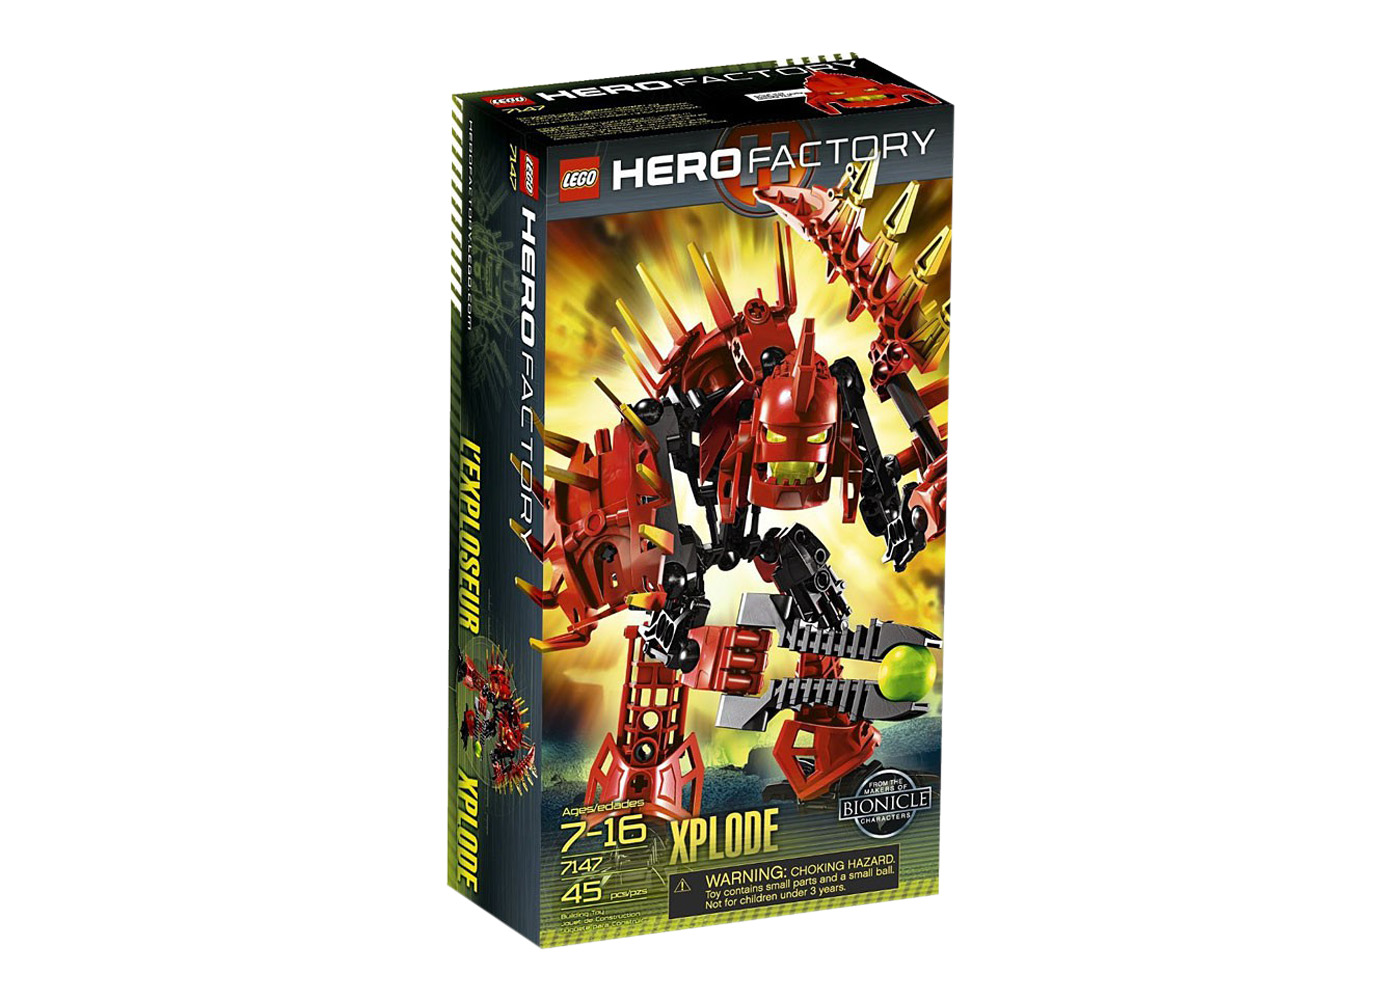 LEGO HERO FACTORY 7147 XPLODE complete figure FREE SHIPPING 